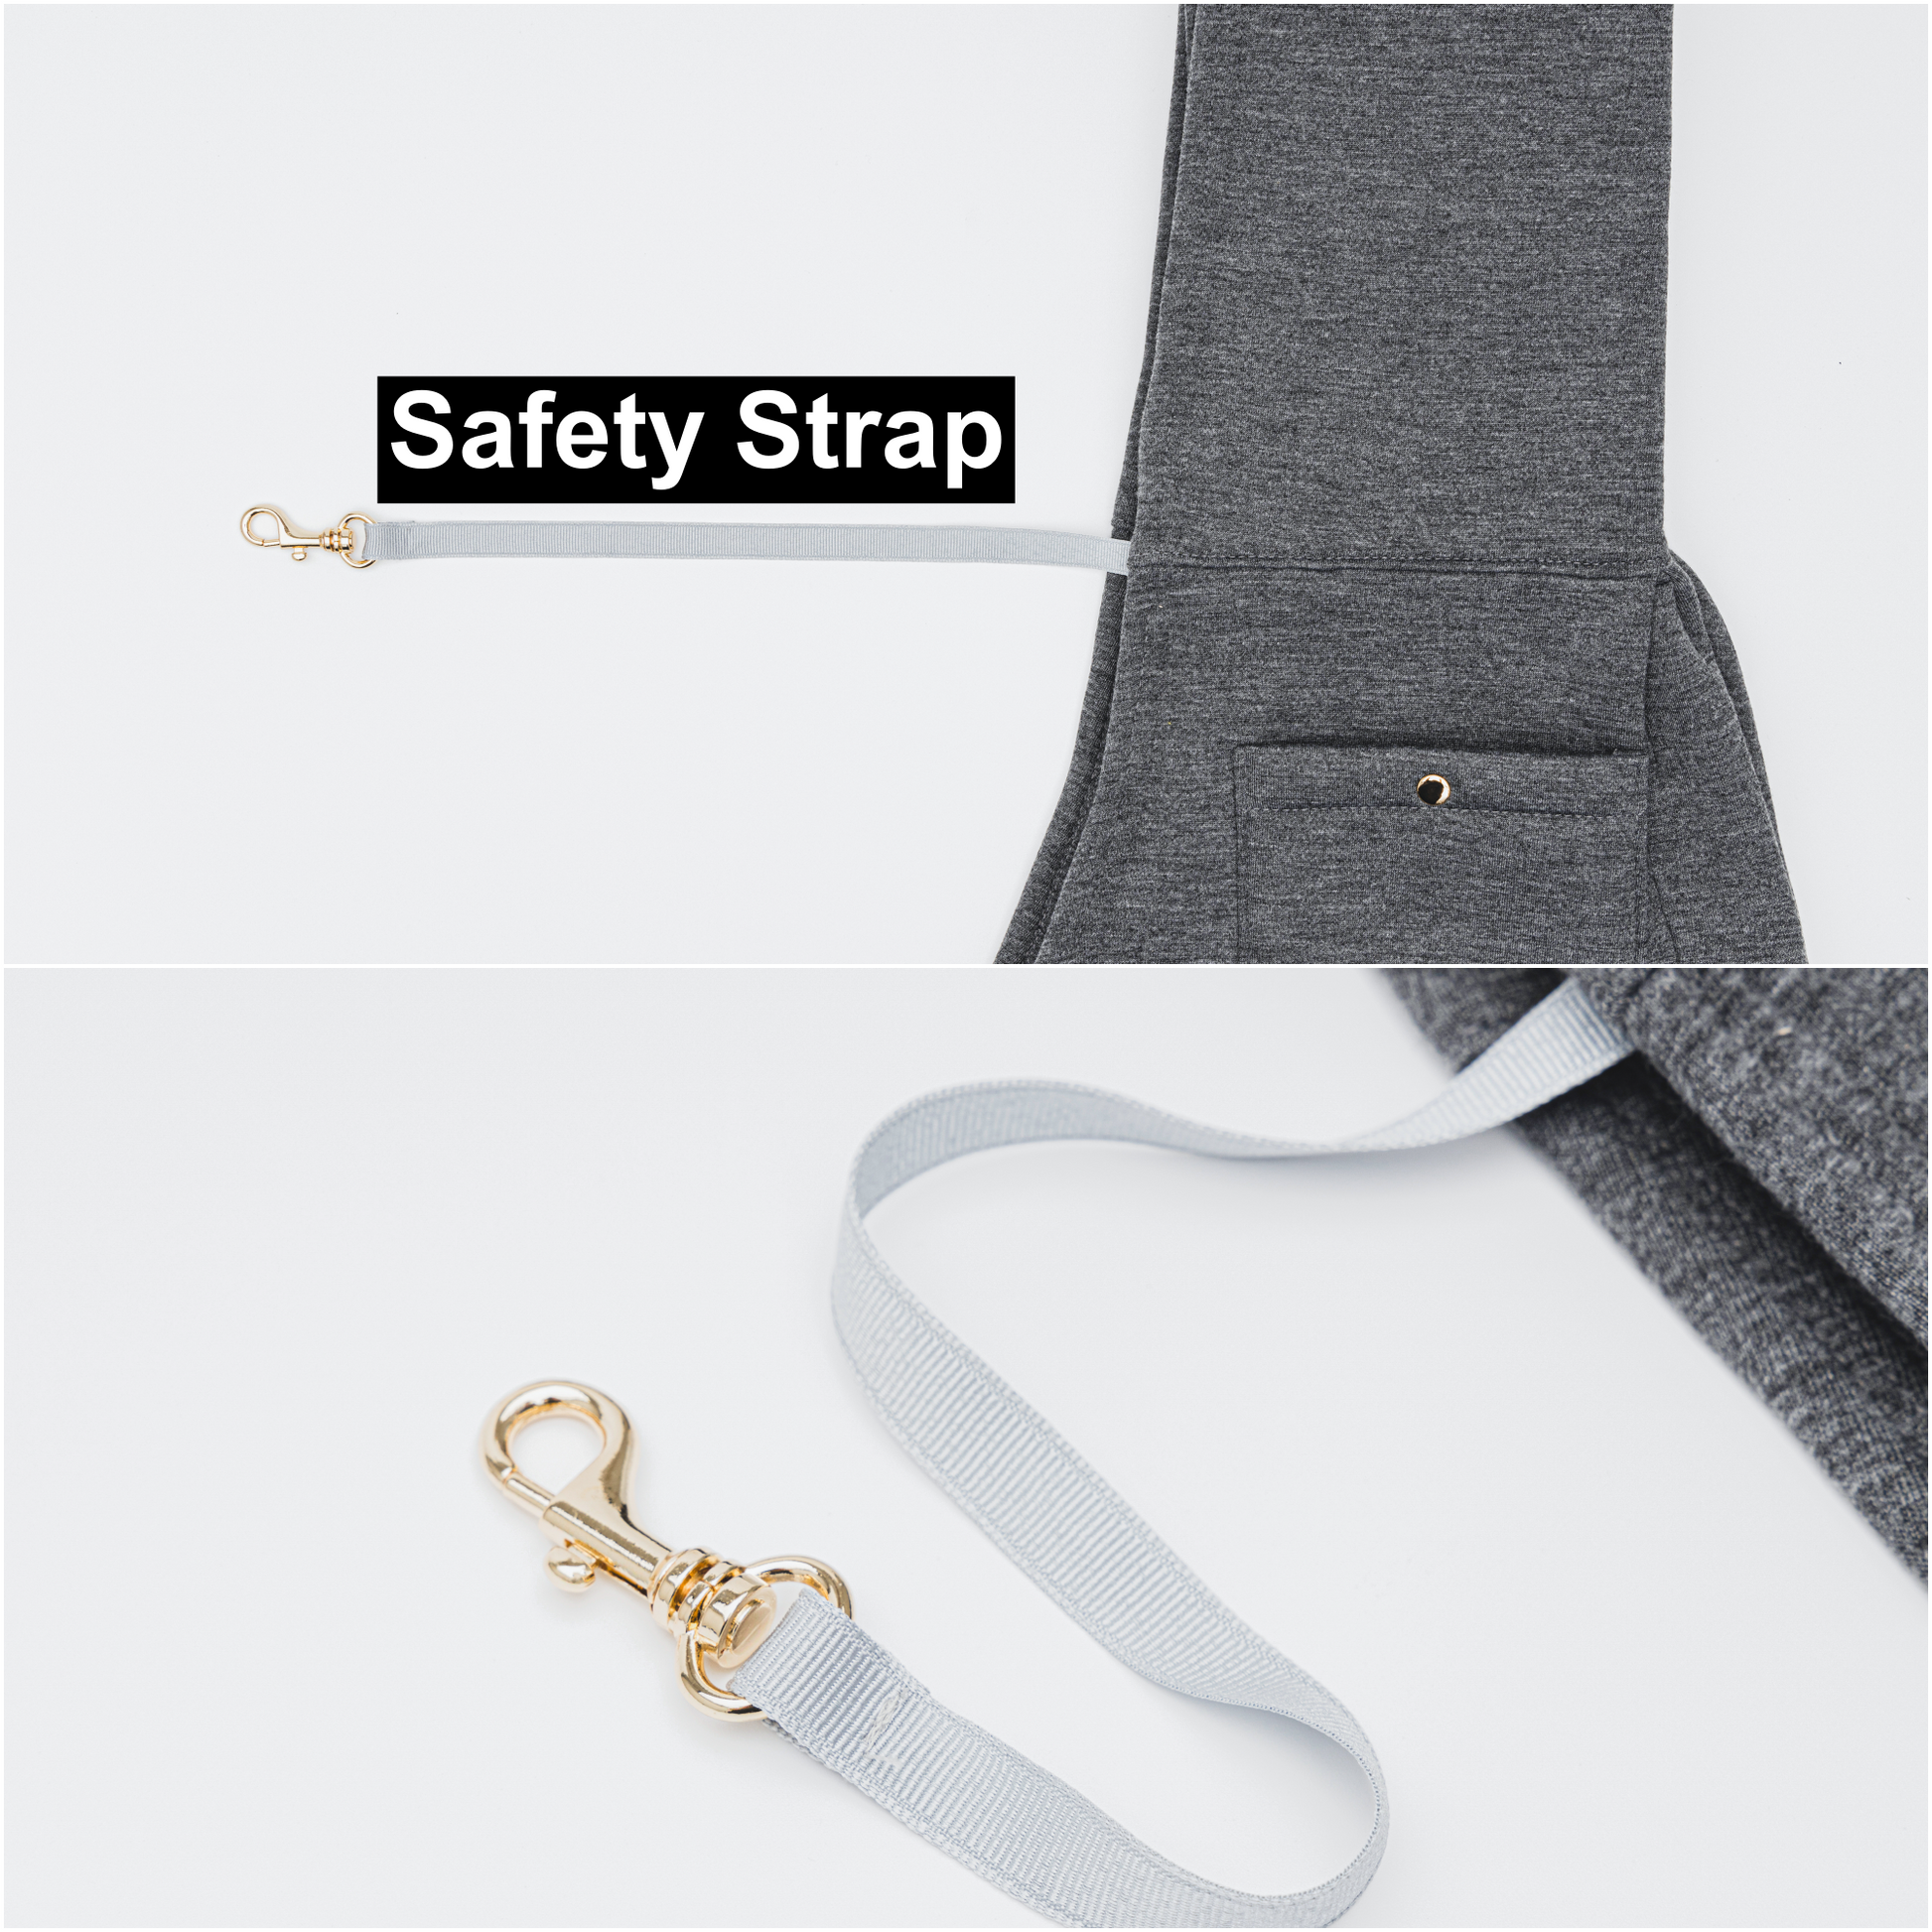 Safety Strap for Your Dog